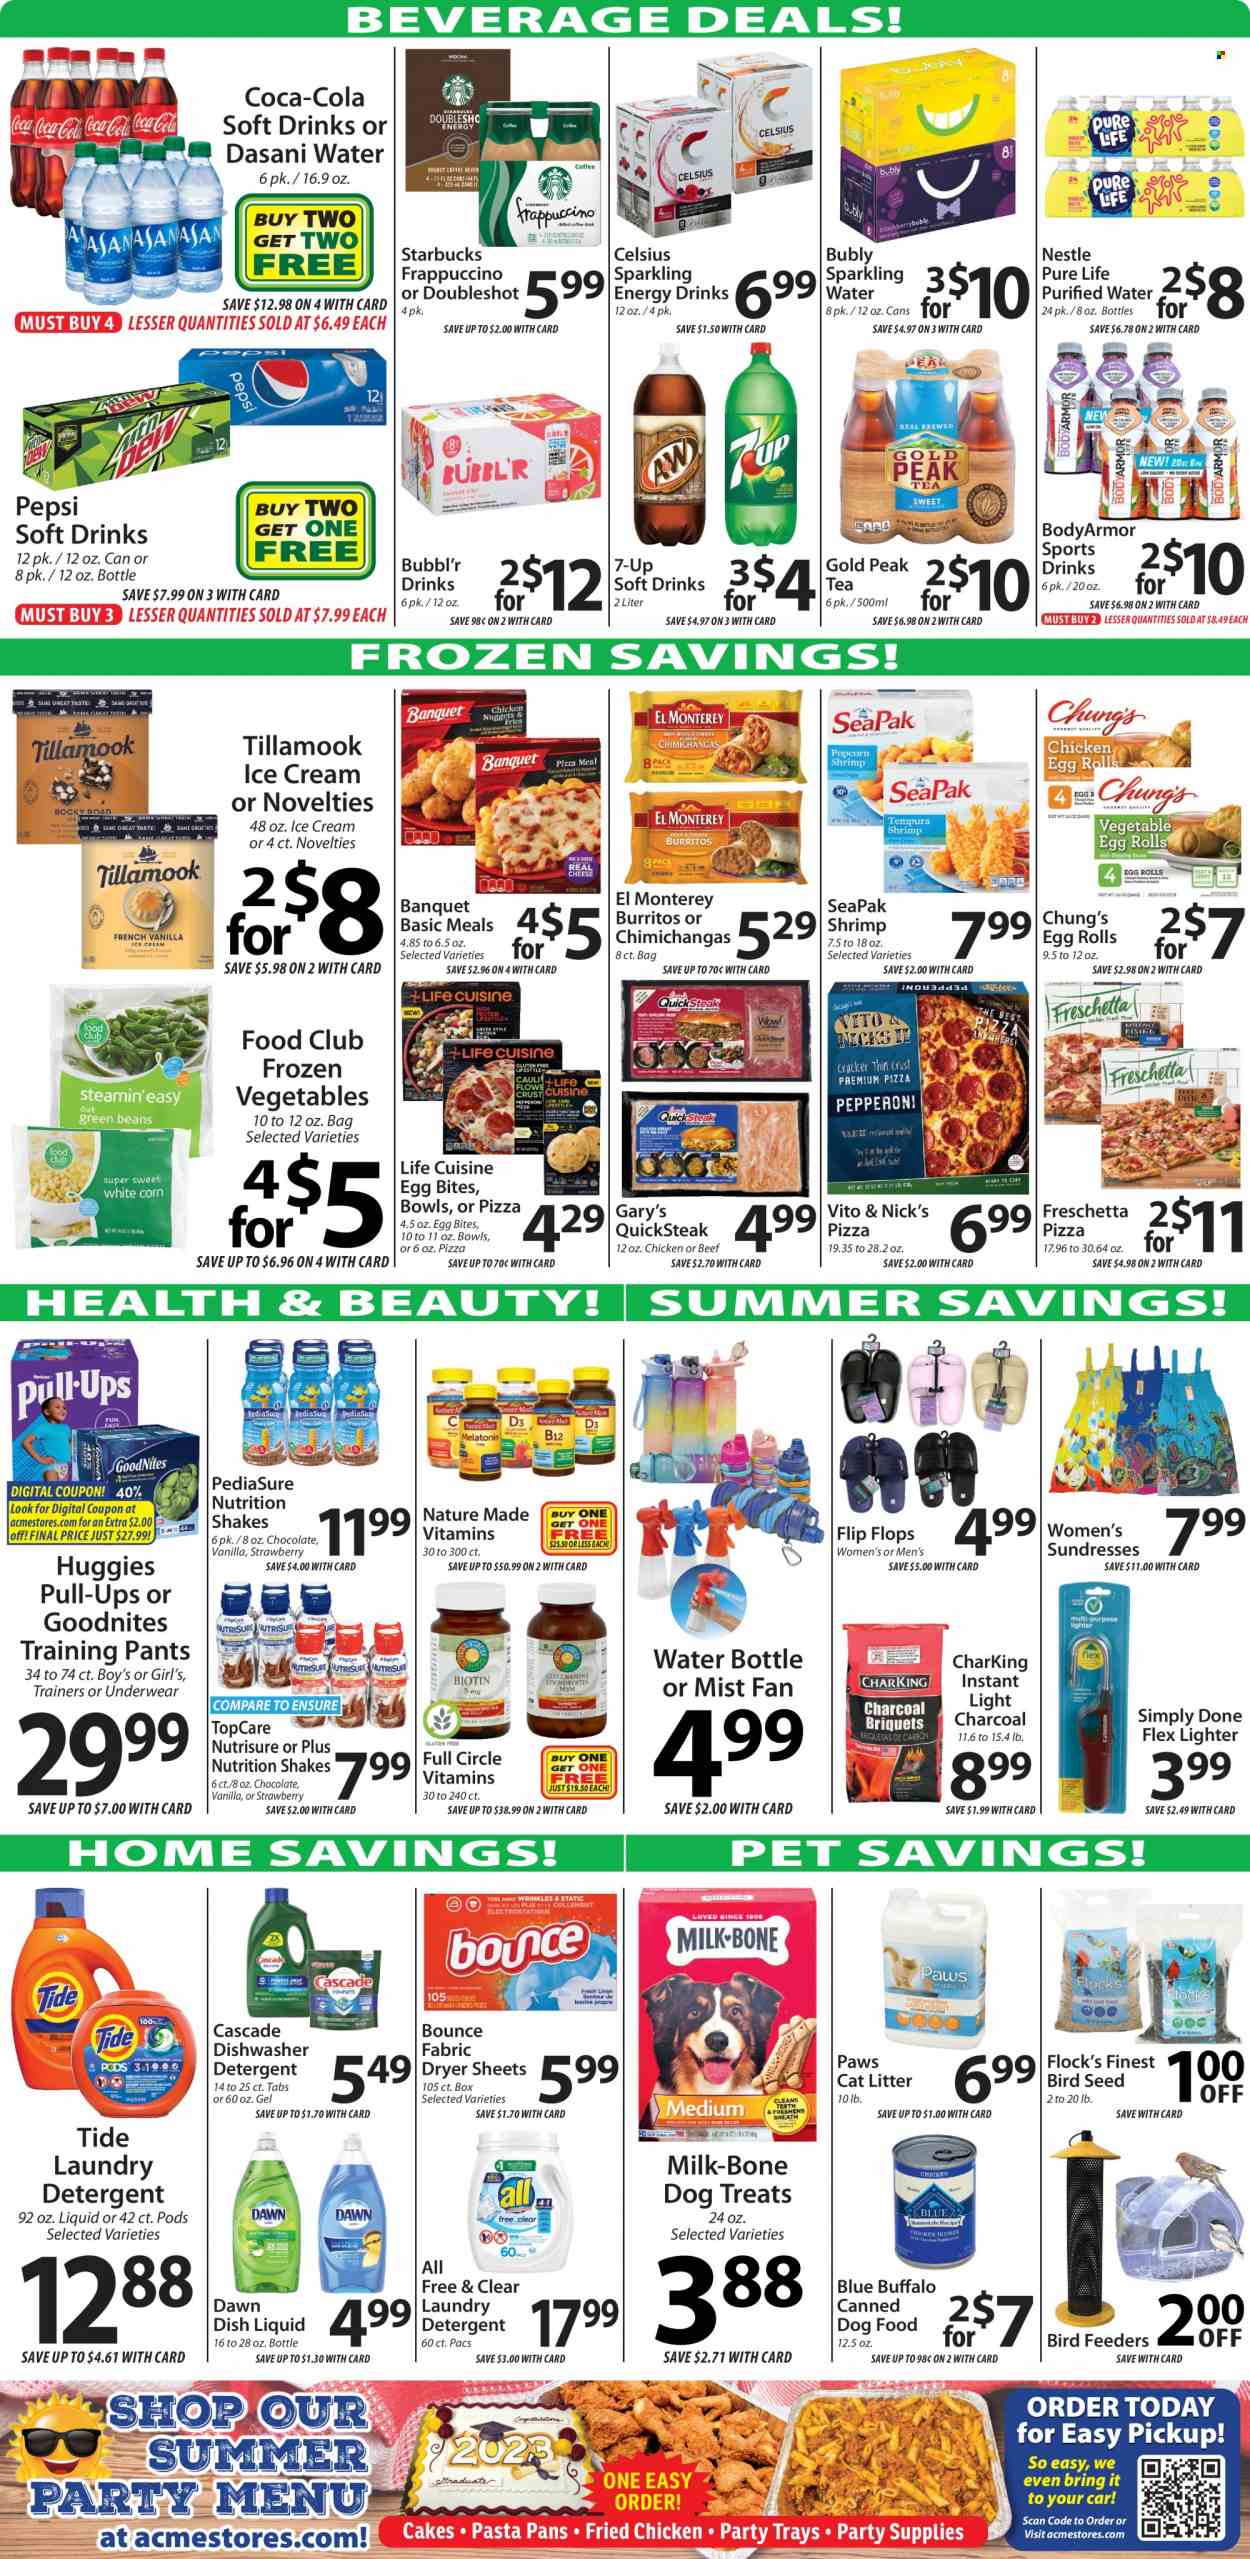 thumbnail - ACME Fresh Market Flyer - 06/01/2023 - 06/07/2023 - Sales products - cake, shrimps, pizza, pasta, egg rolls, fried chicken, burrito, shake, ice cream, frozen vegetables, Nestlé, Coca-Cola, Pepsi, energy drink, ice tea, soft drink, 7UP, Gold Peak Tea, sparkling water, purified water, water, Starbucks, frappuccino, Huggies, pants, baby pants, detergent, Cascade, Tide, laundry detergent, Bounce, dryer sheets, dishwashing liquid, dishwasher cleaner, cat litter, drink bottle, bird feeder, Paws. Page 3.